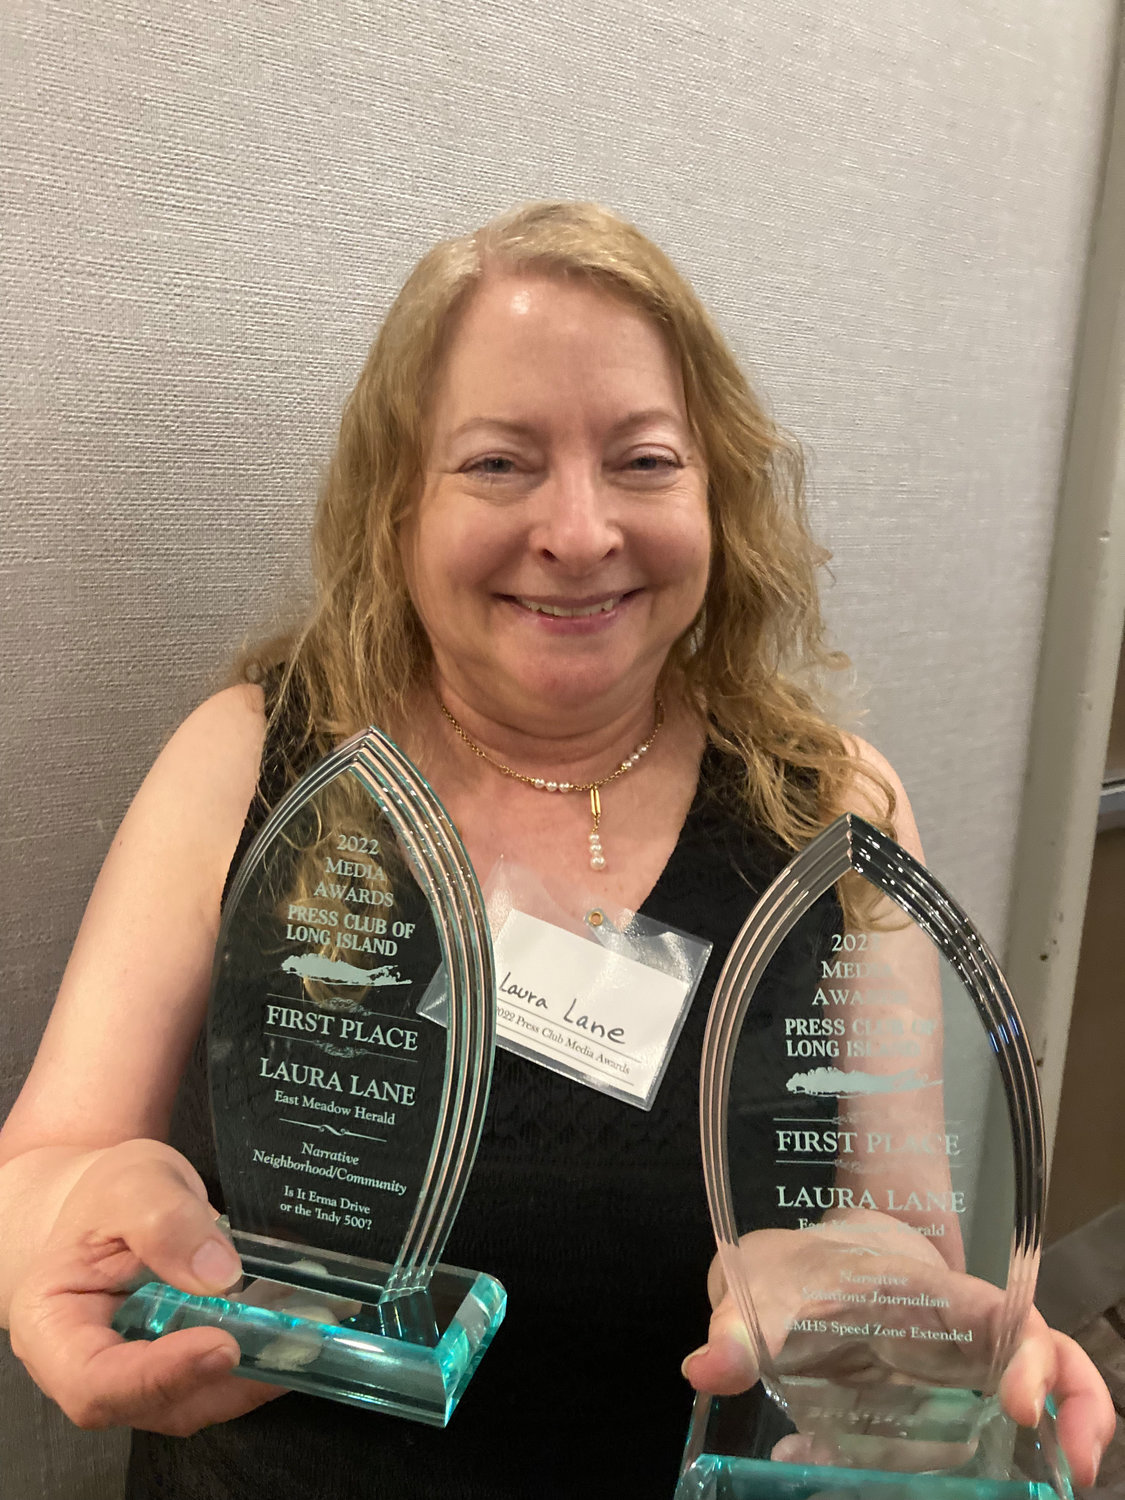 Herald Community Newspapers senior editor Laura Lane won two first place awards during the annual ceremony hosted by the Press Club of Long Island.